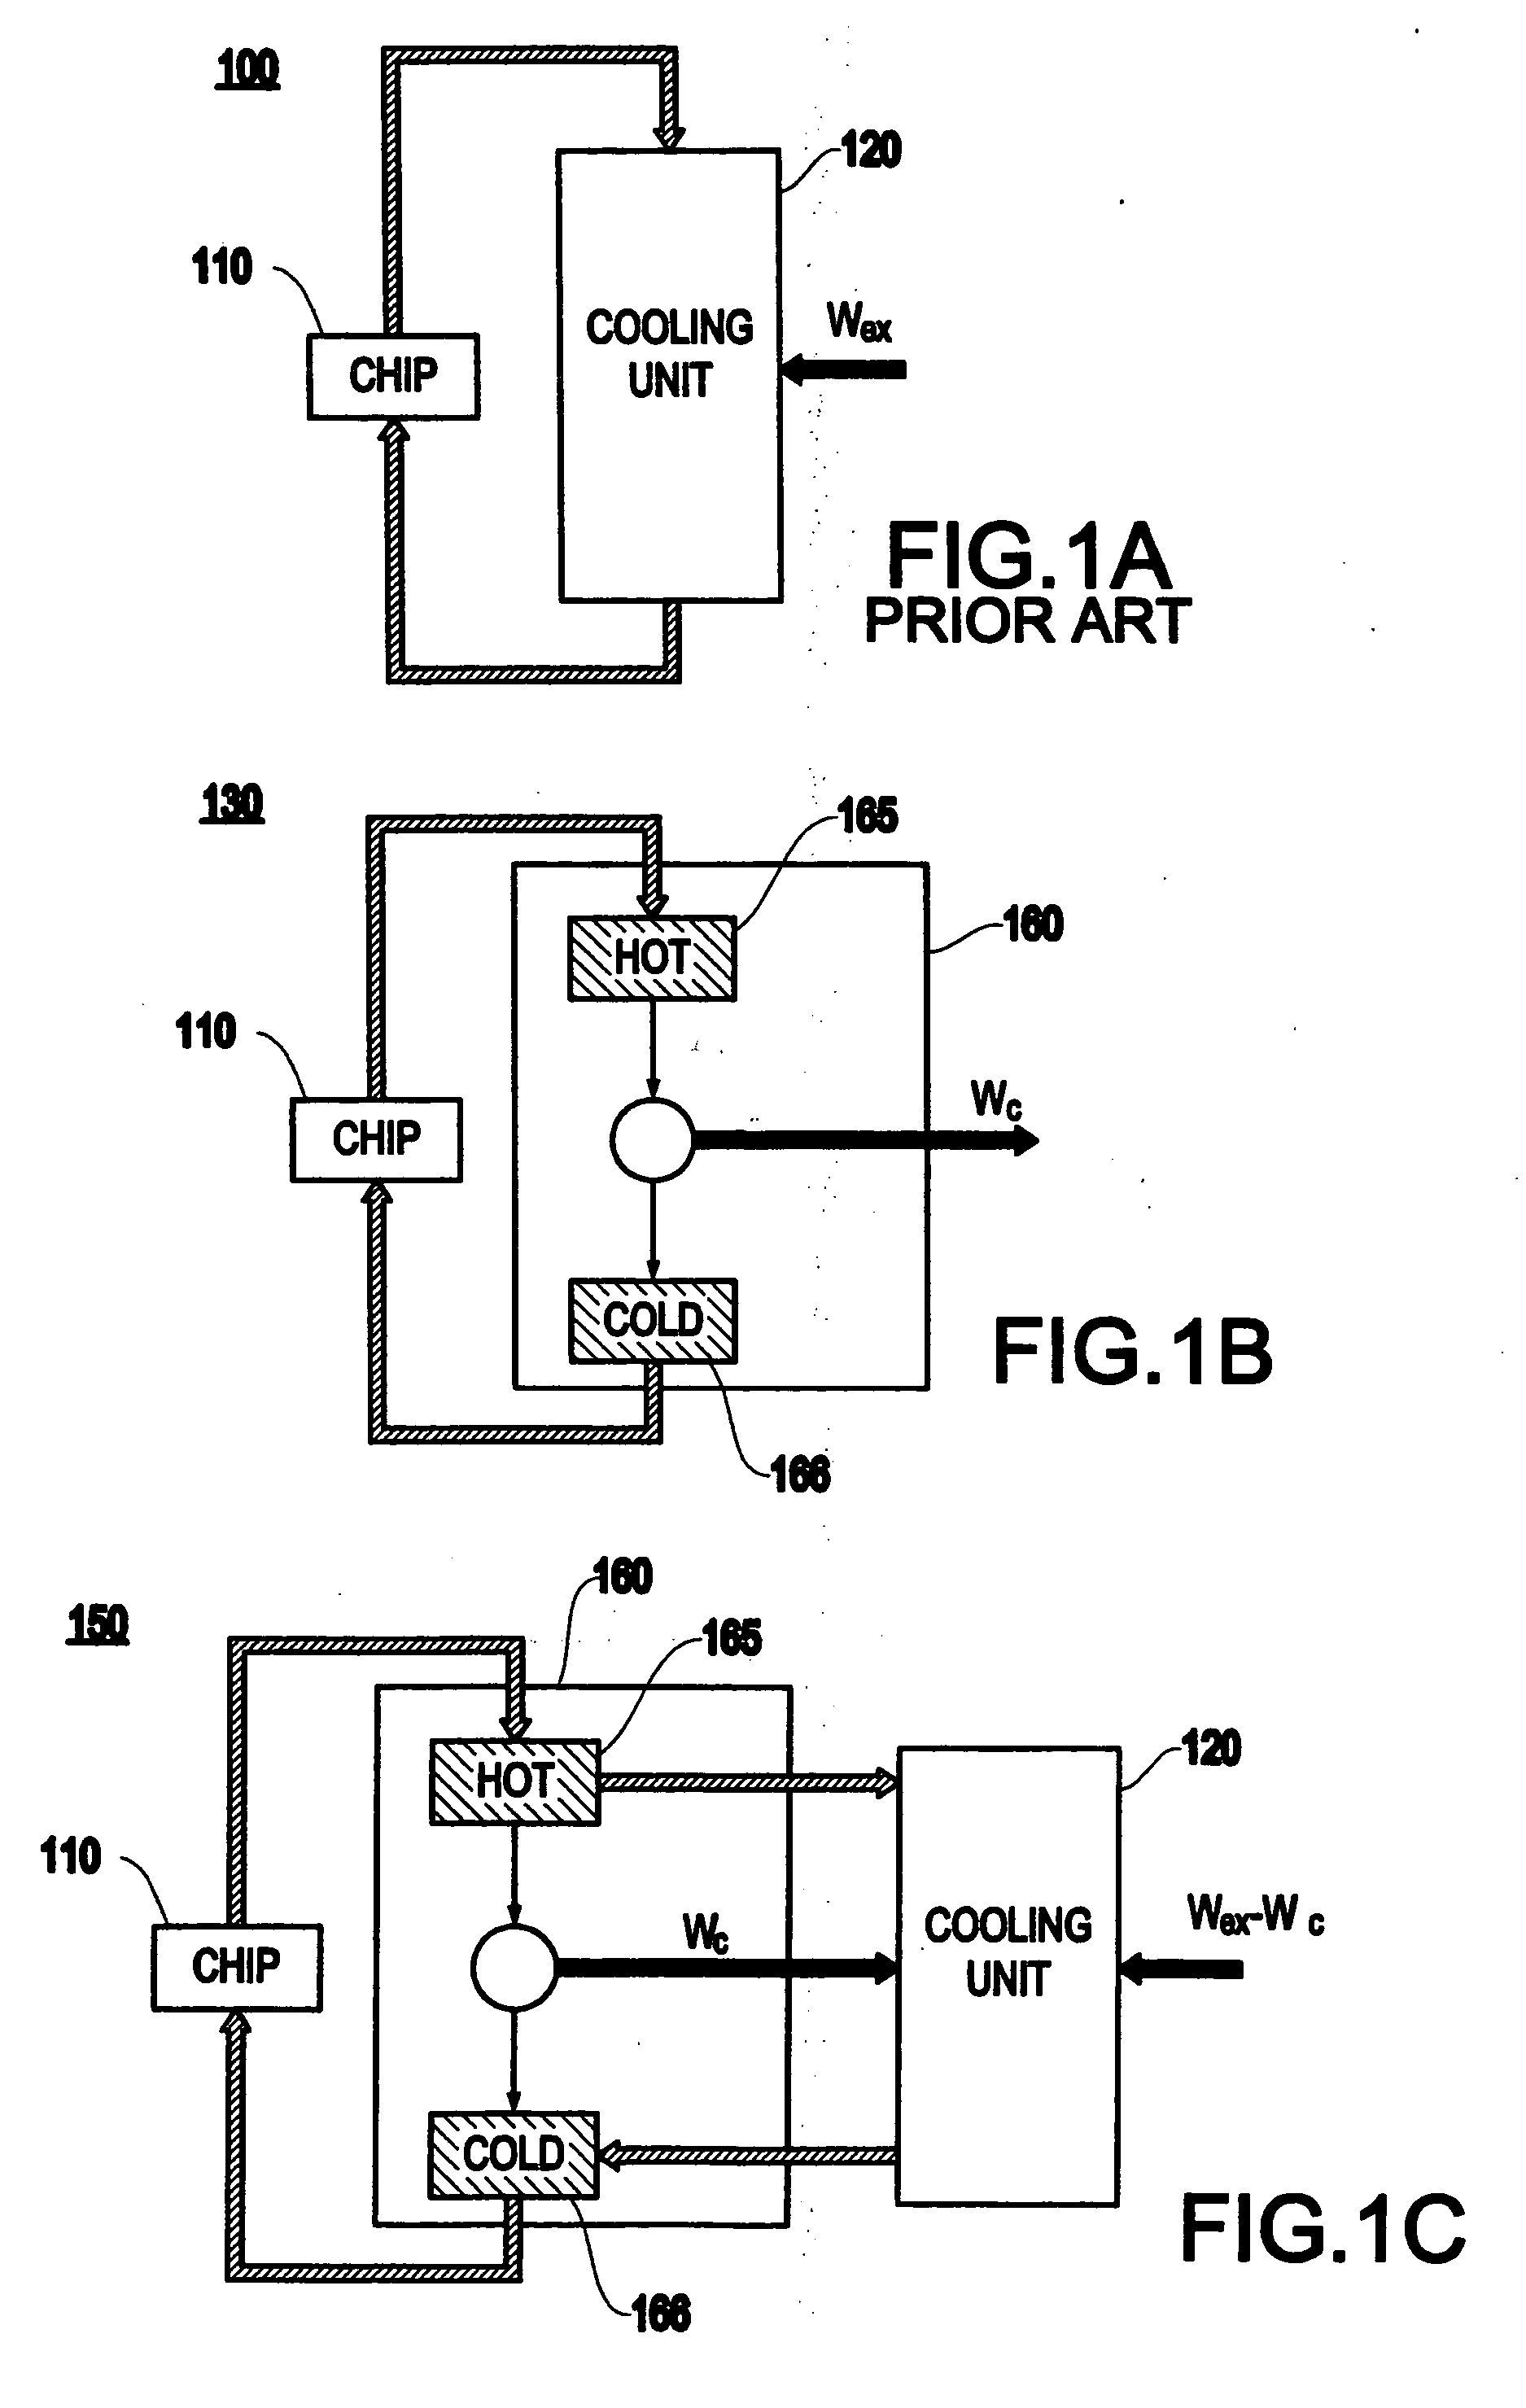 Method and apparatus for improving power efficiencies of computer systems